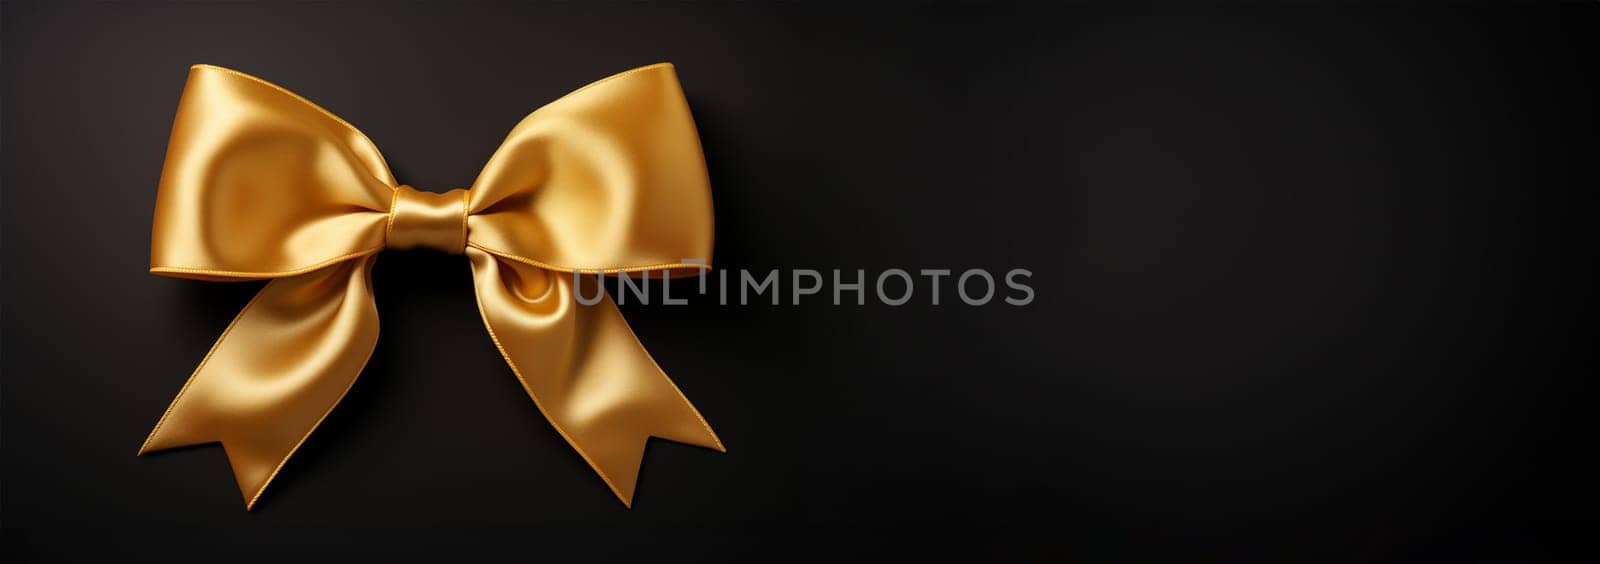 Realistic golden bow isolated on black background. Golden gift bows for cards, presentation, valentine's day, christmas and birthday illustrations. Copy space by Annebel146